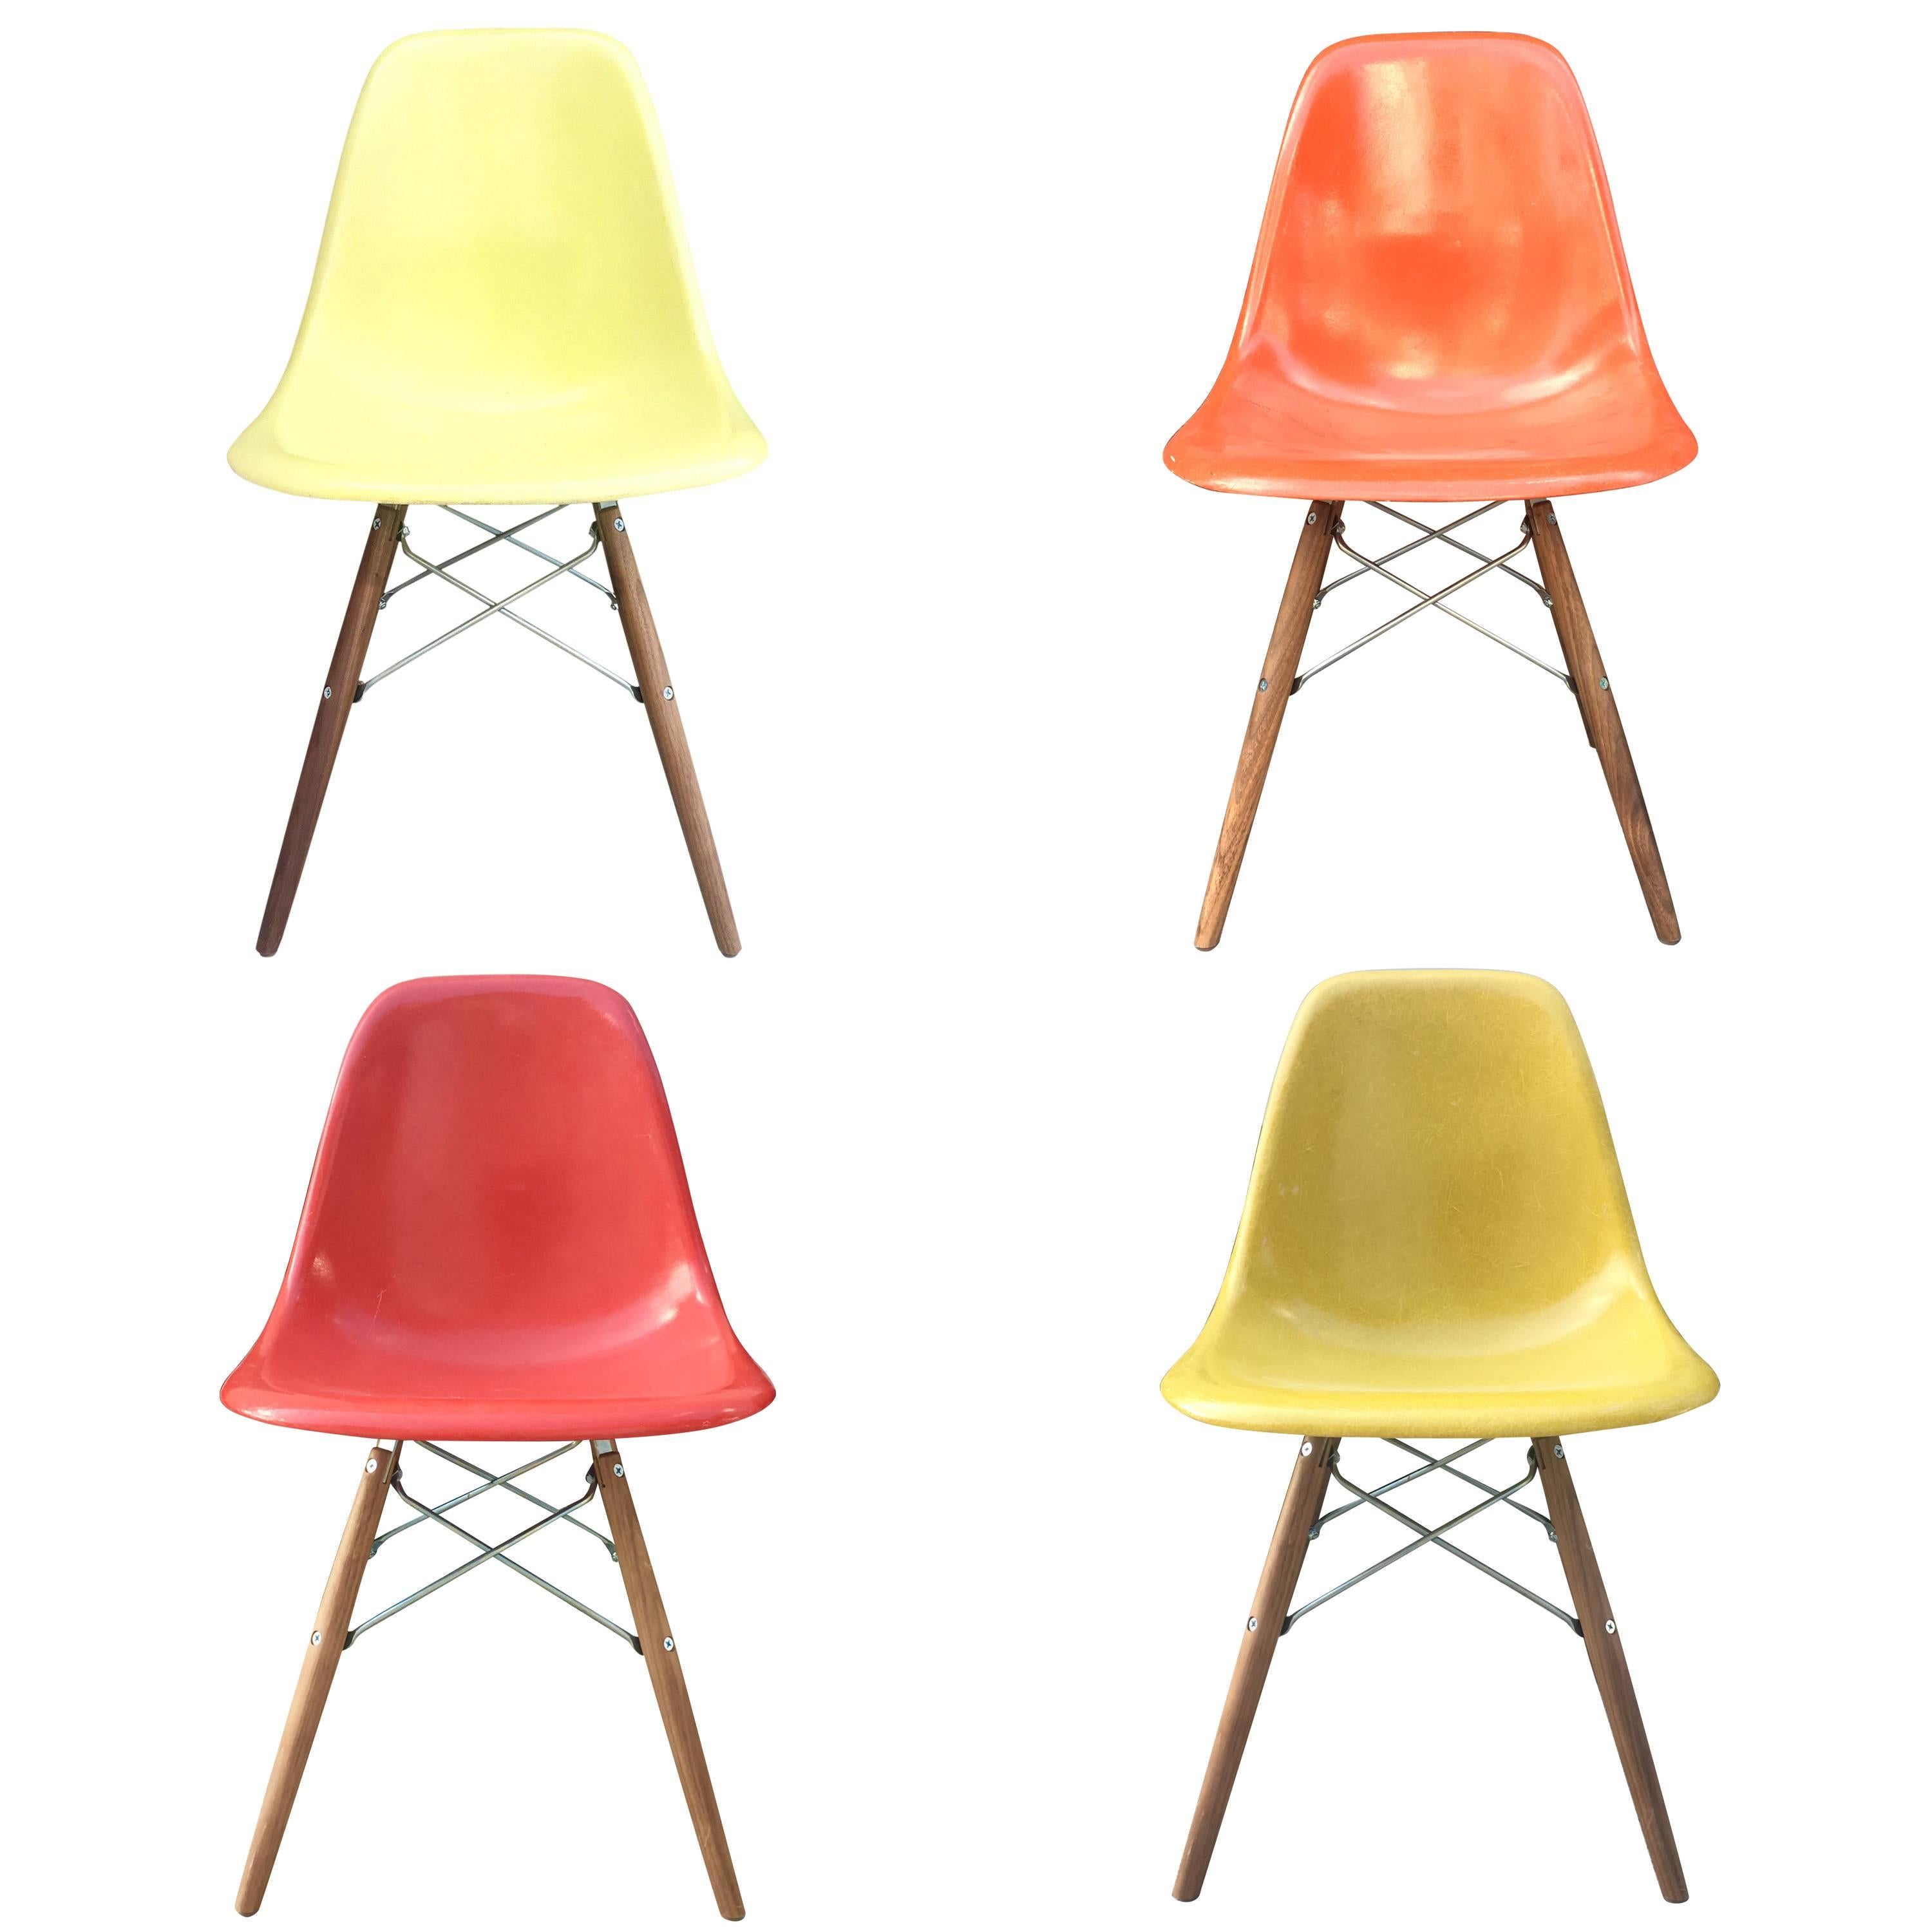 Four Multicolored Herman Miller Eames Dining Chairs